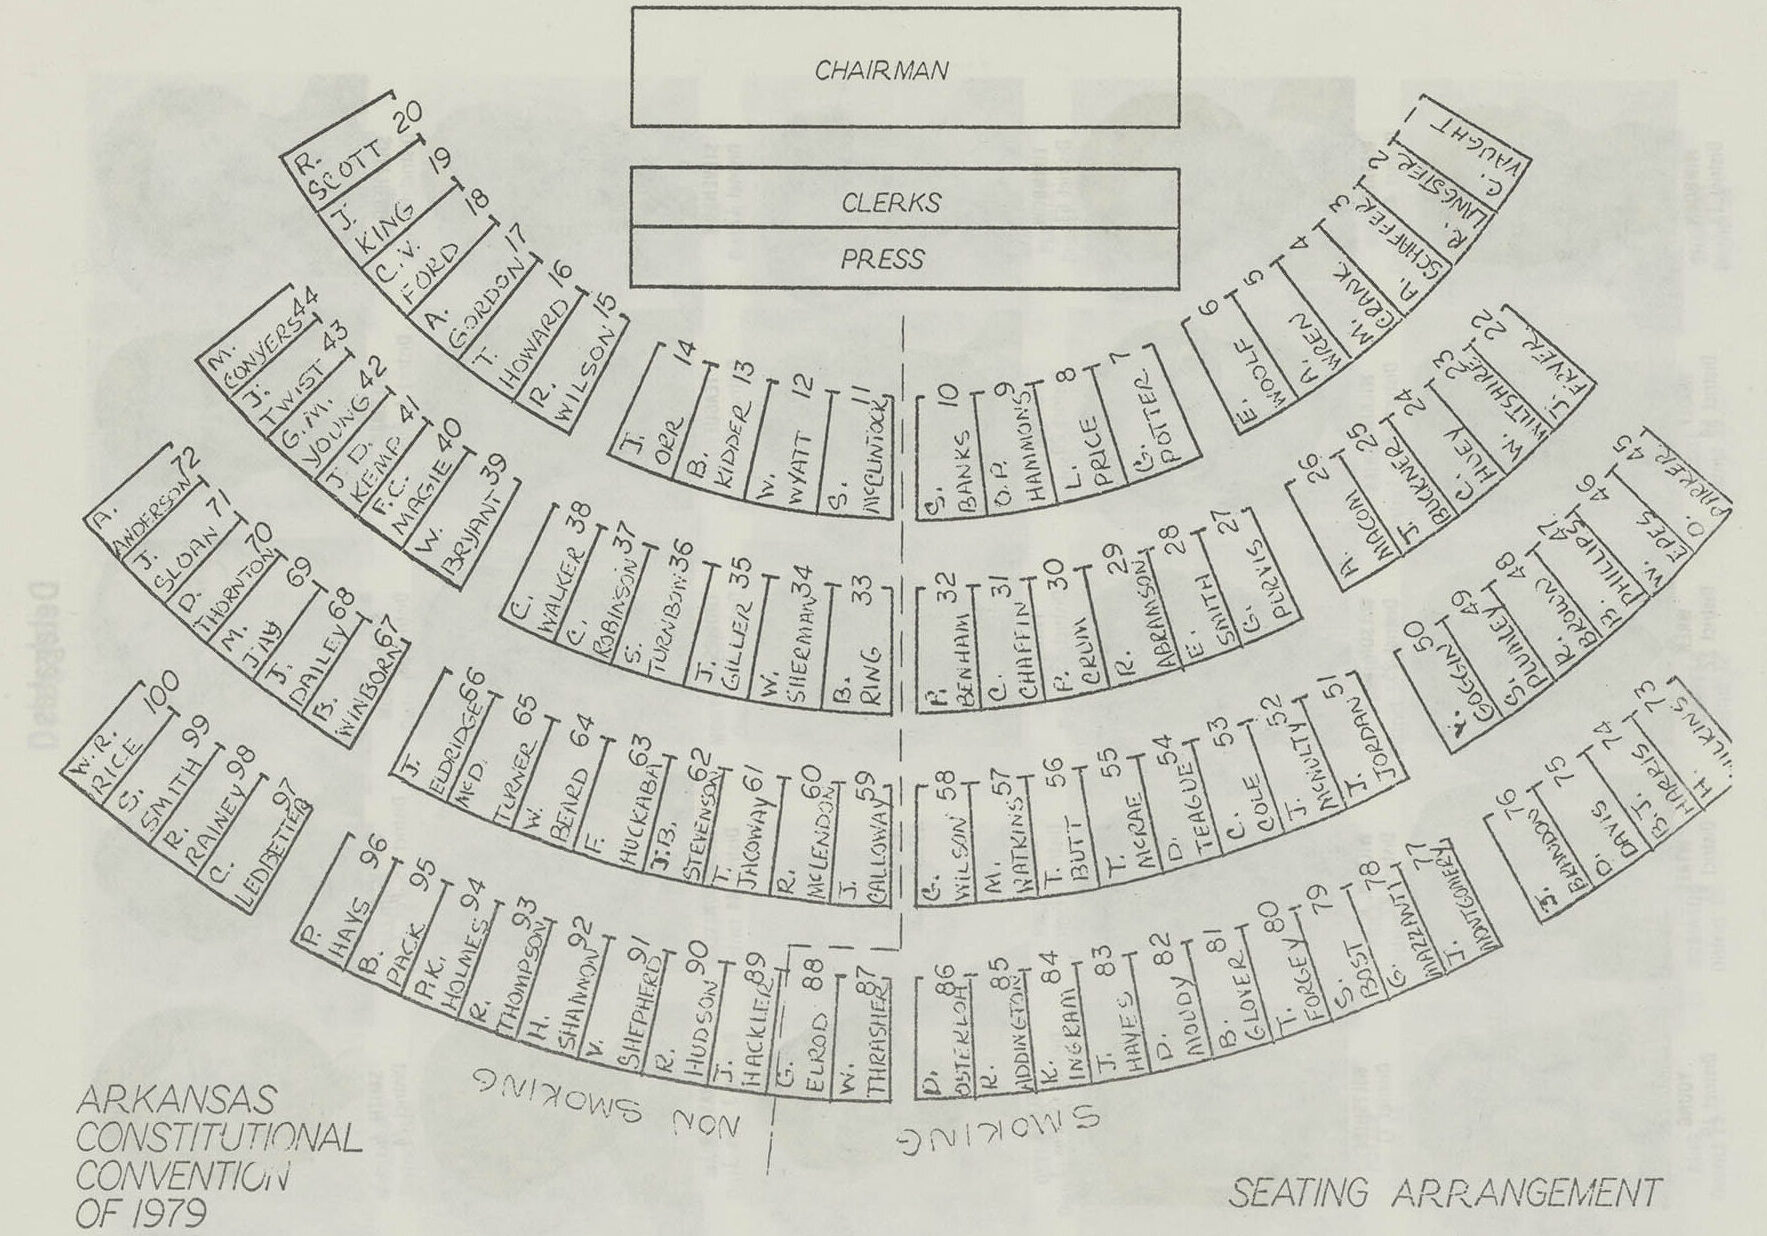 Seating arrangement map for the delegates at the 1979 Constitutional Convention. It depicts the floor plan of the Arkansas House of Representatives' chamber with each delegate's name in a seat.